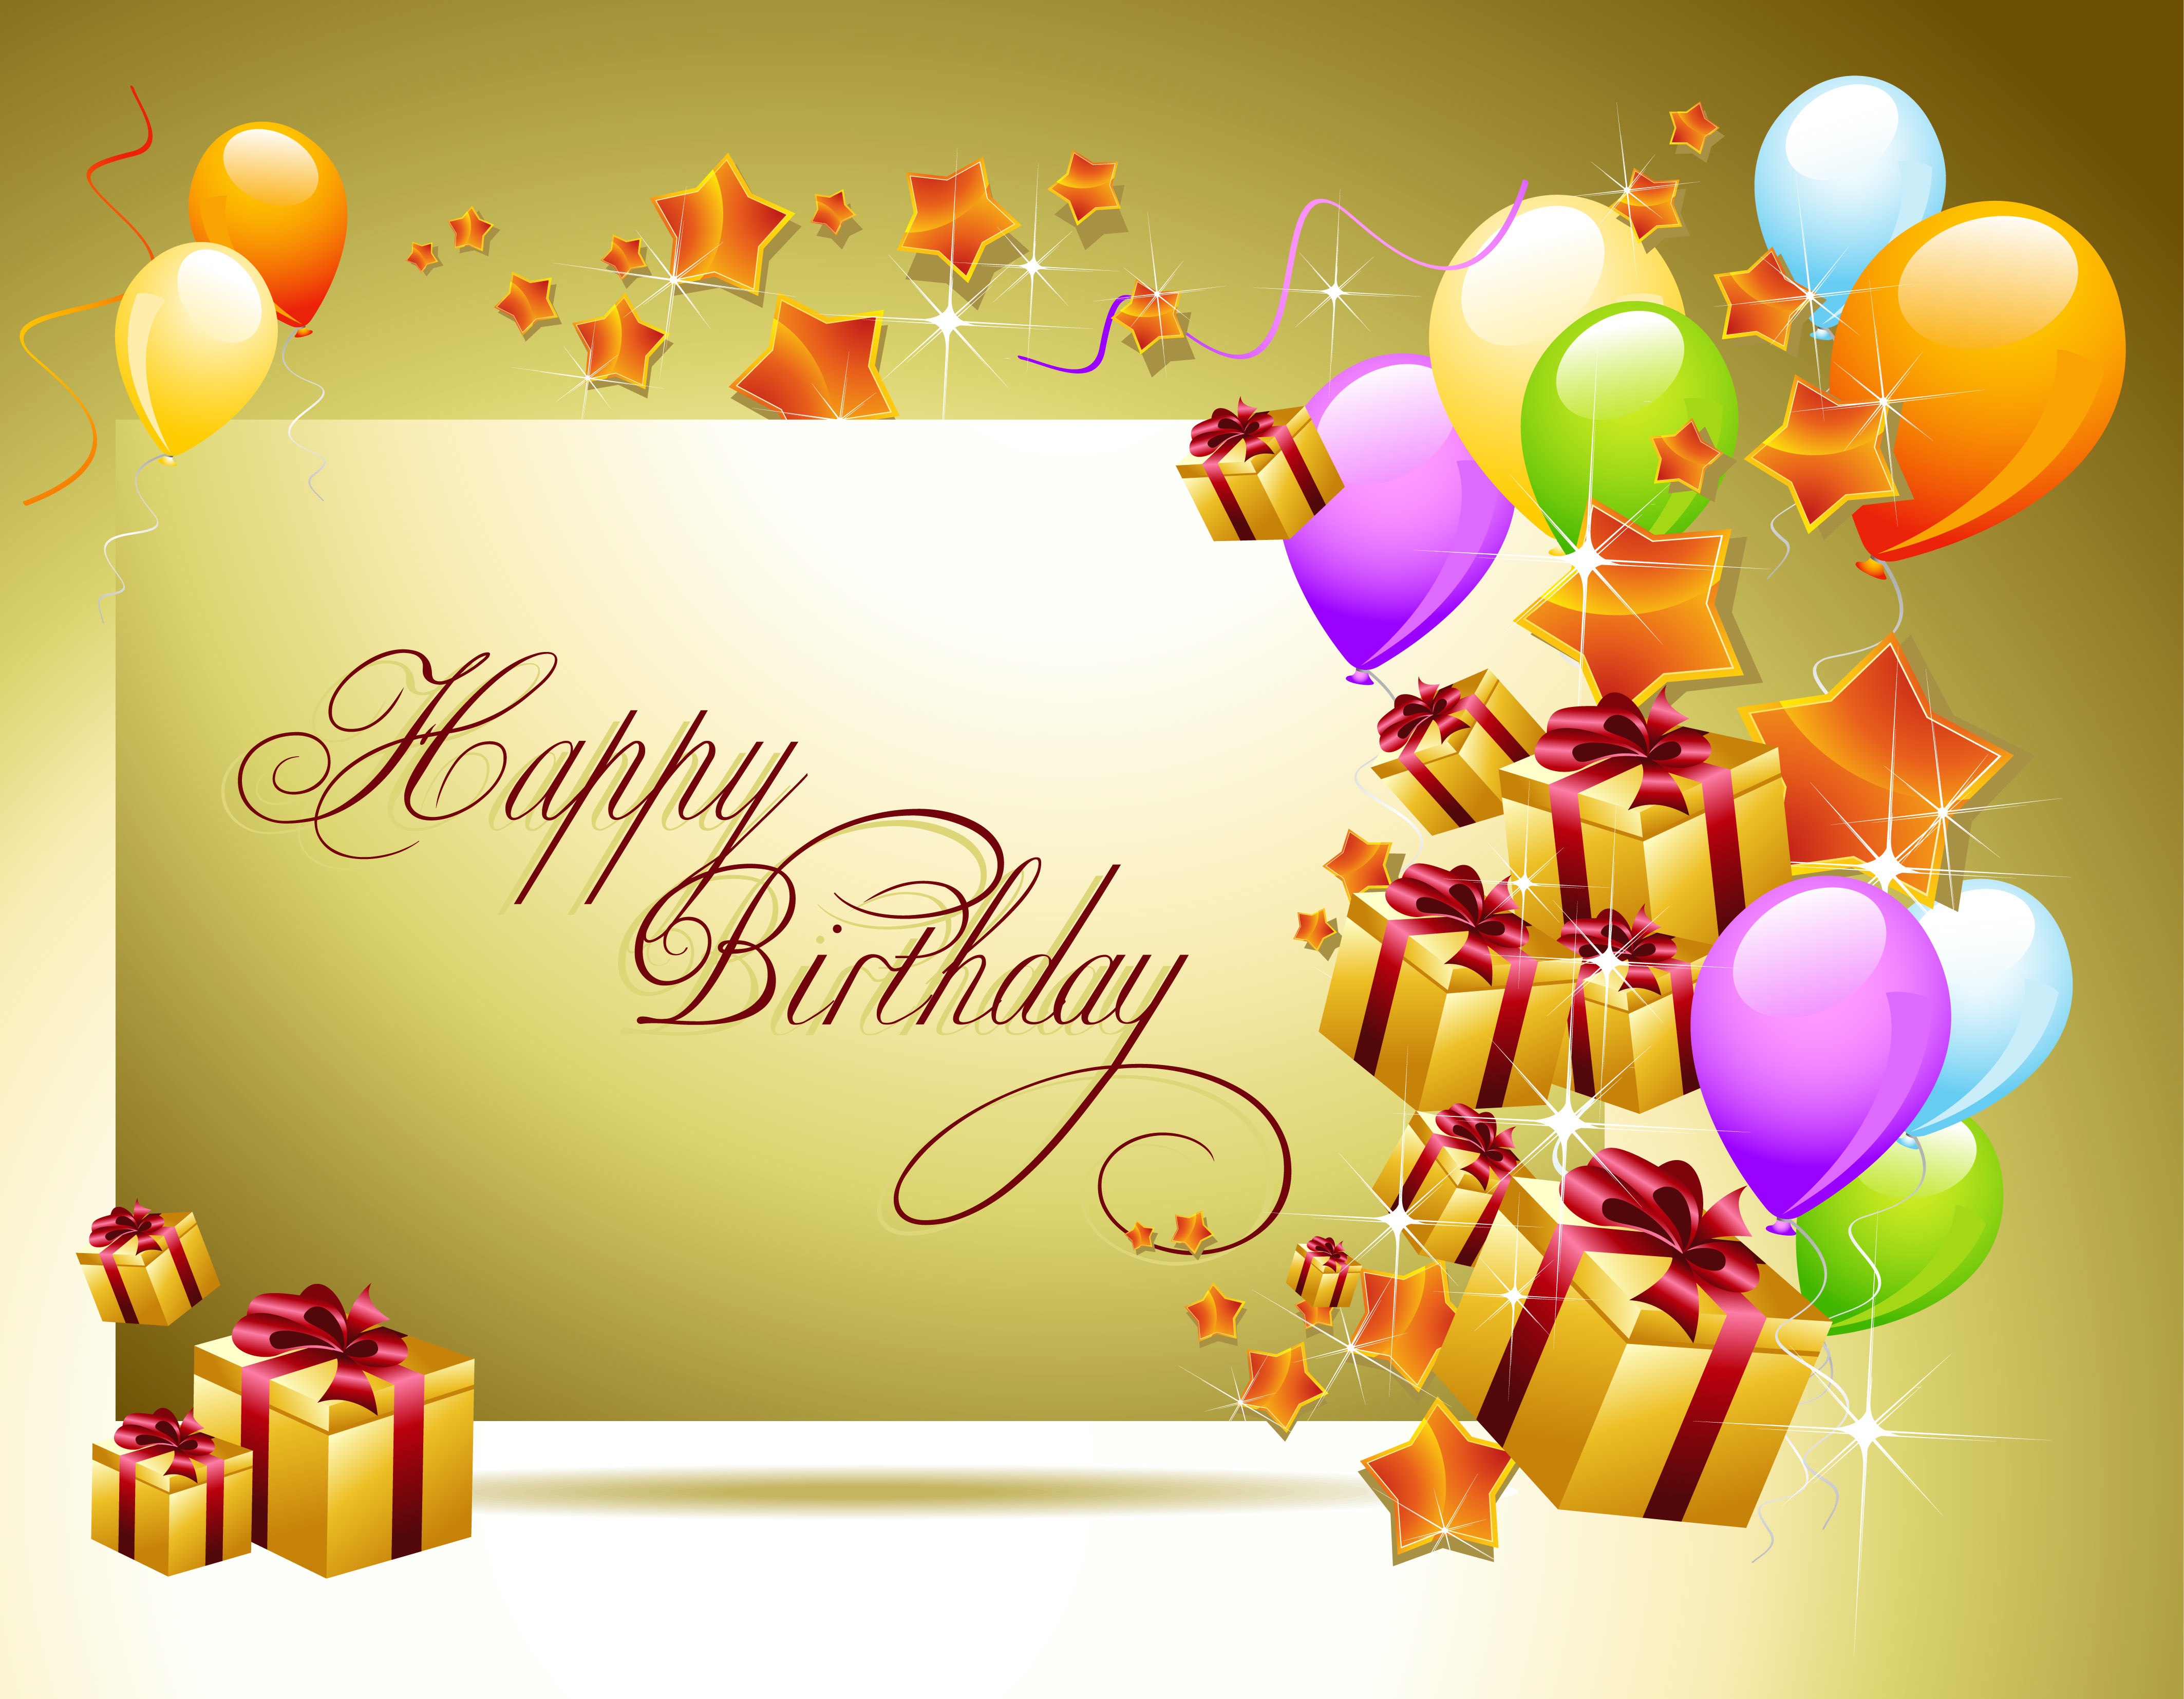 Trending BirtHDay Quotes And Greetings Image